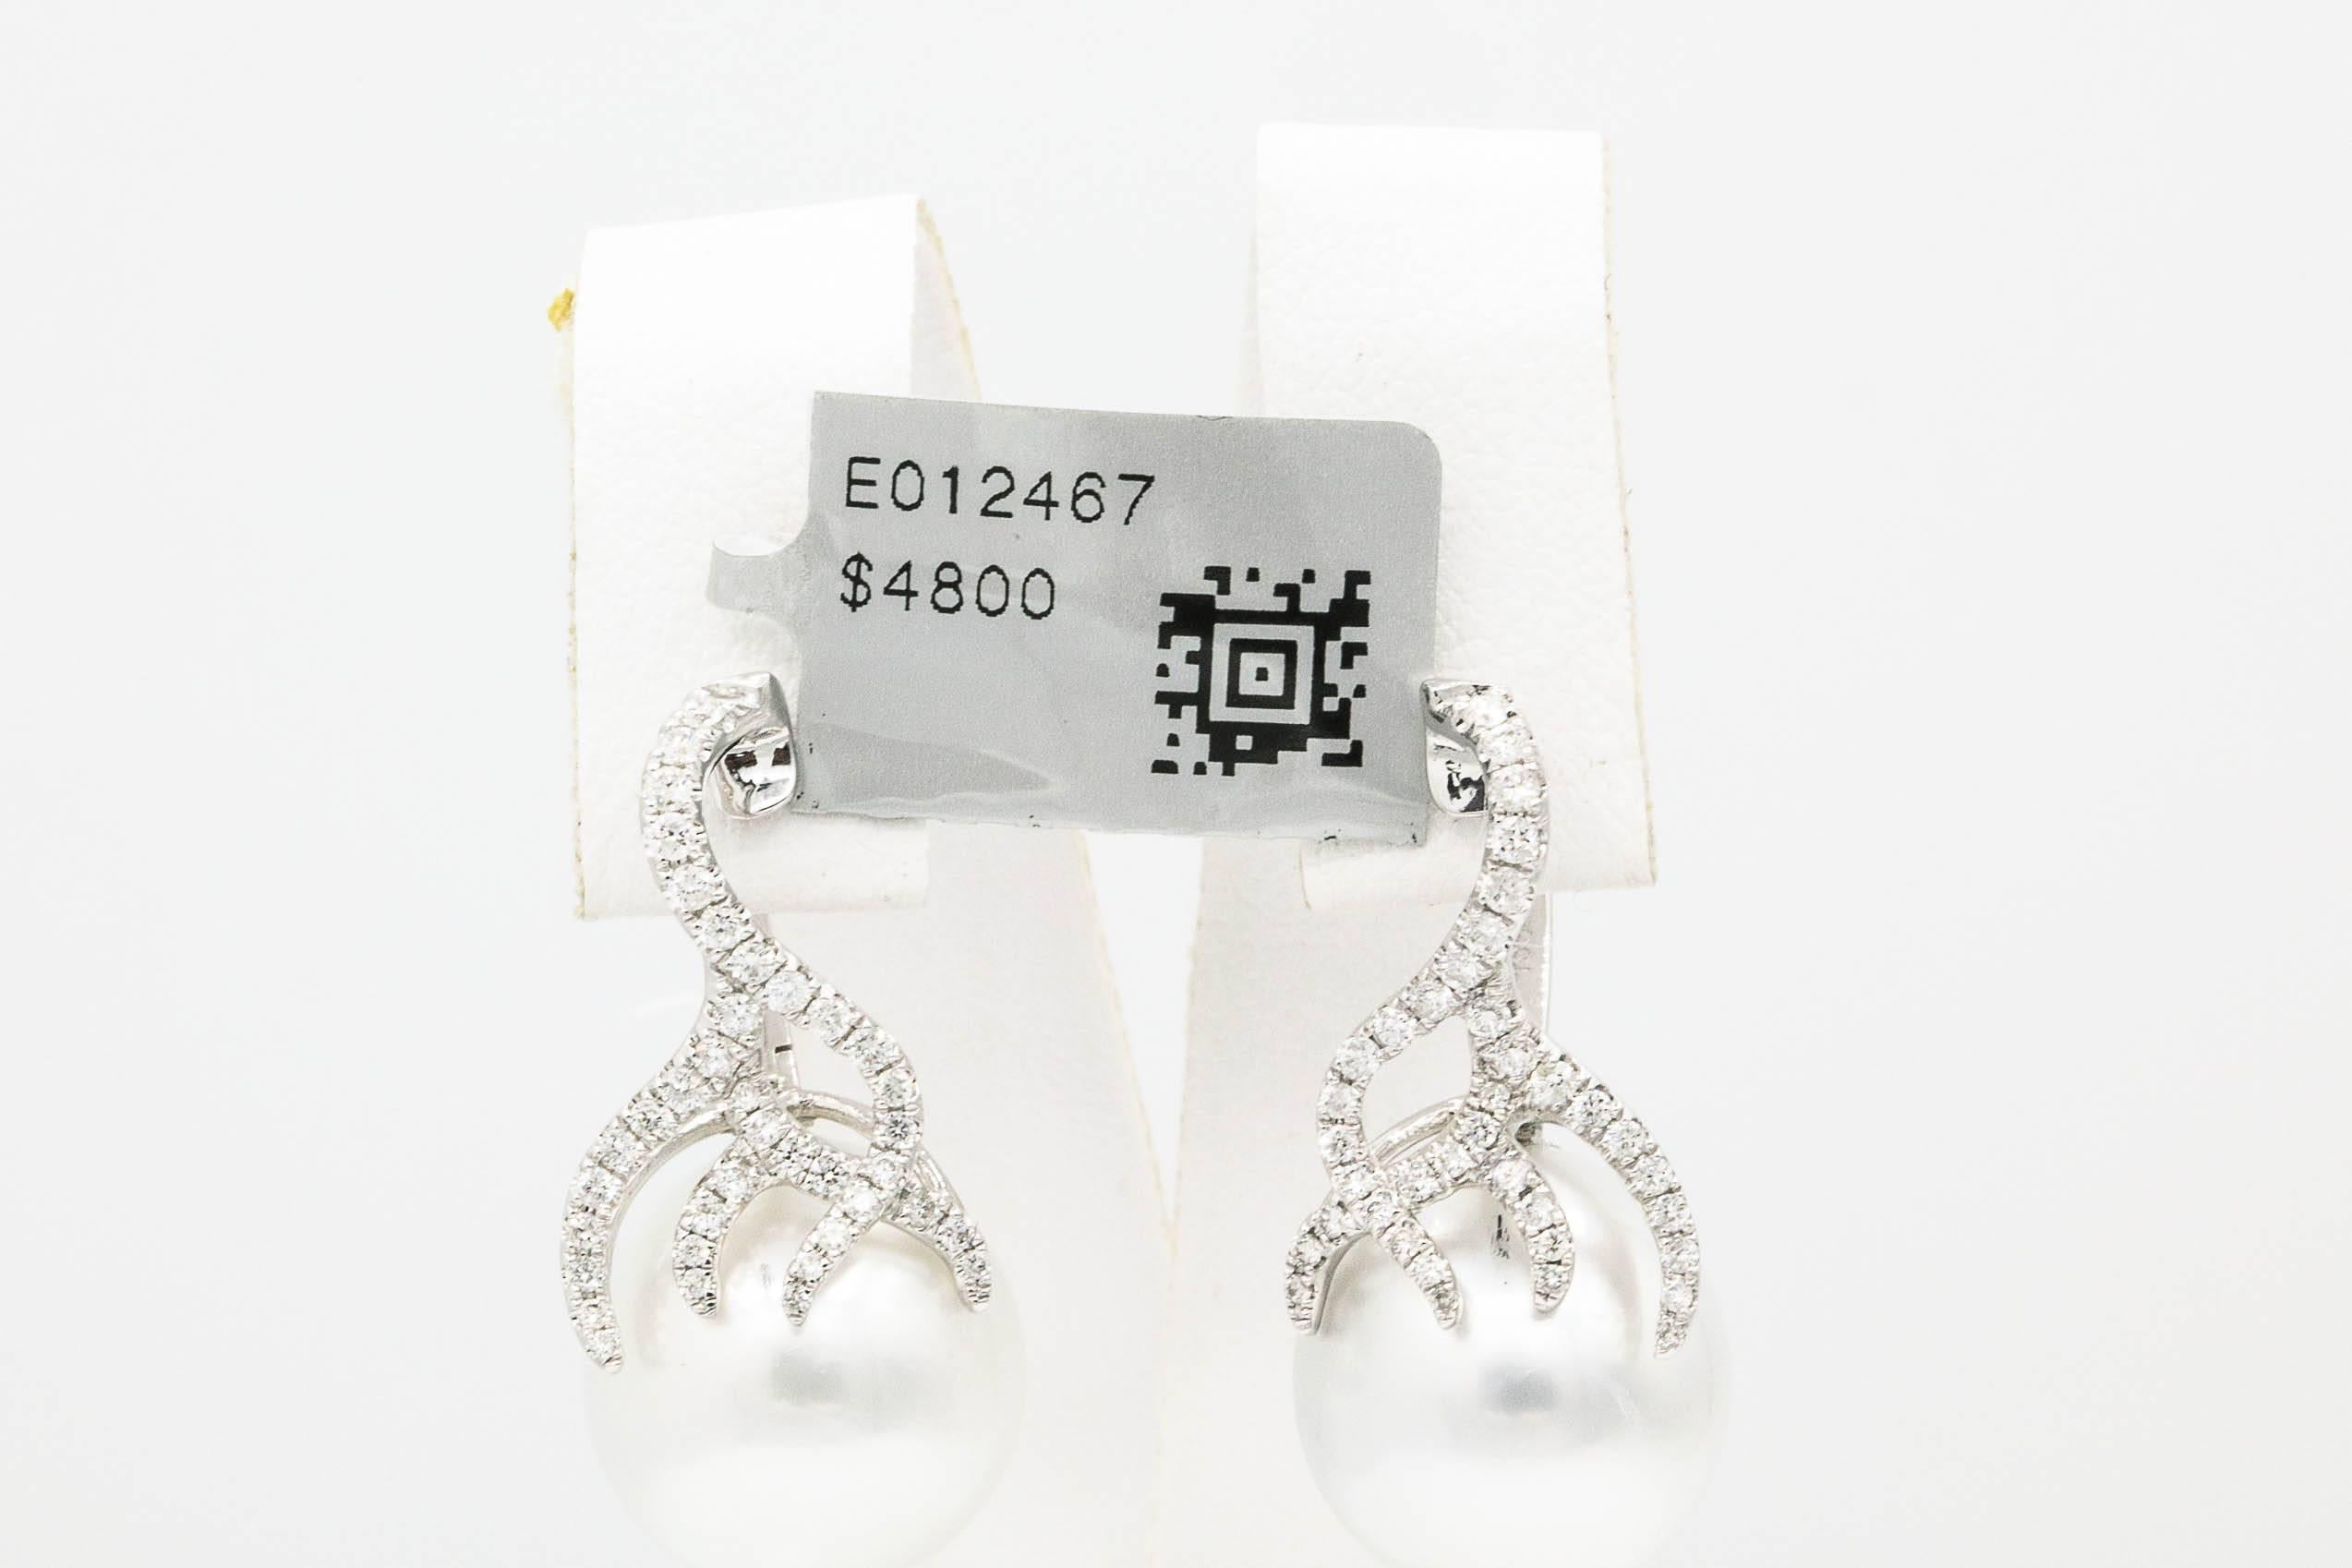 18K White Gold
South Sea Pearl 13-14mm
Diamonds 0.52 Cts.